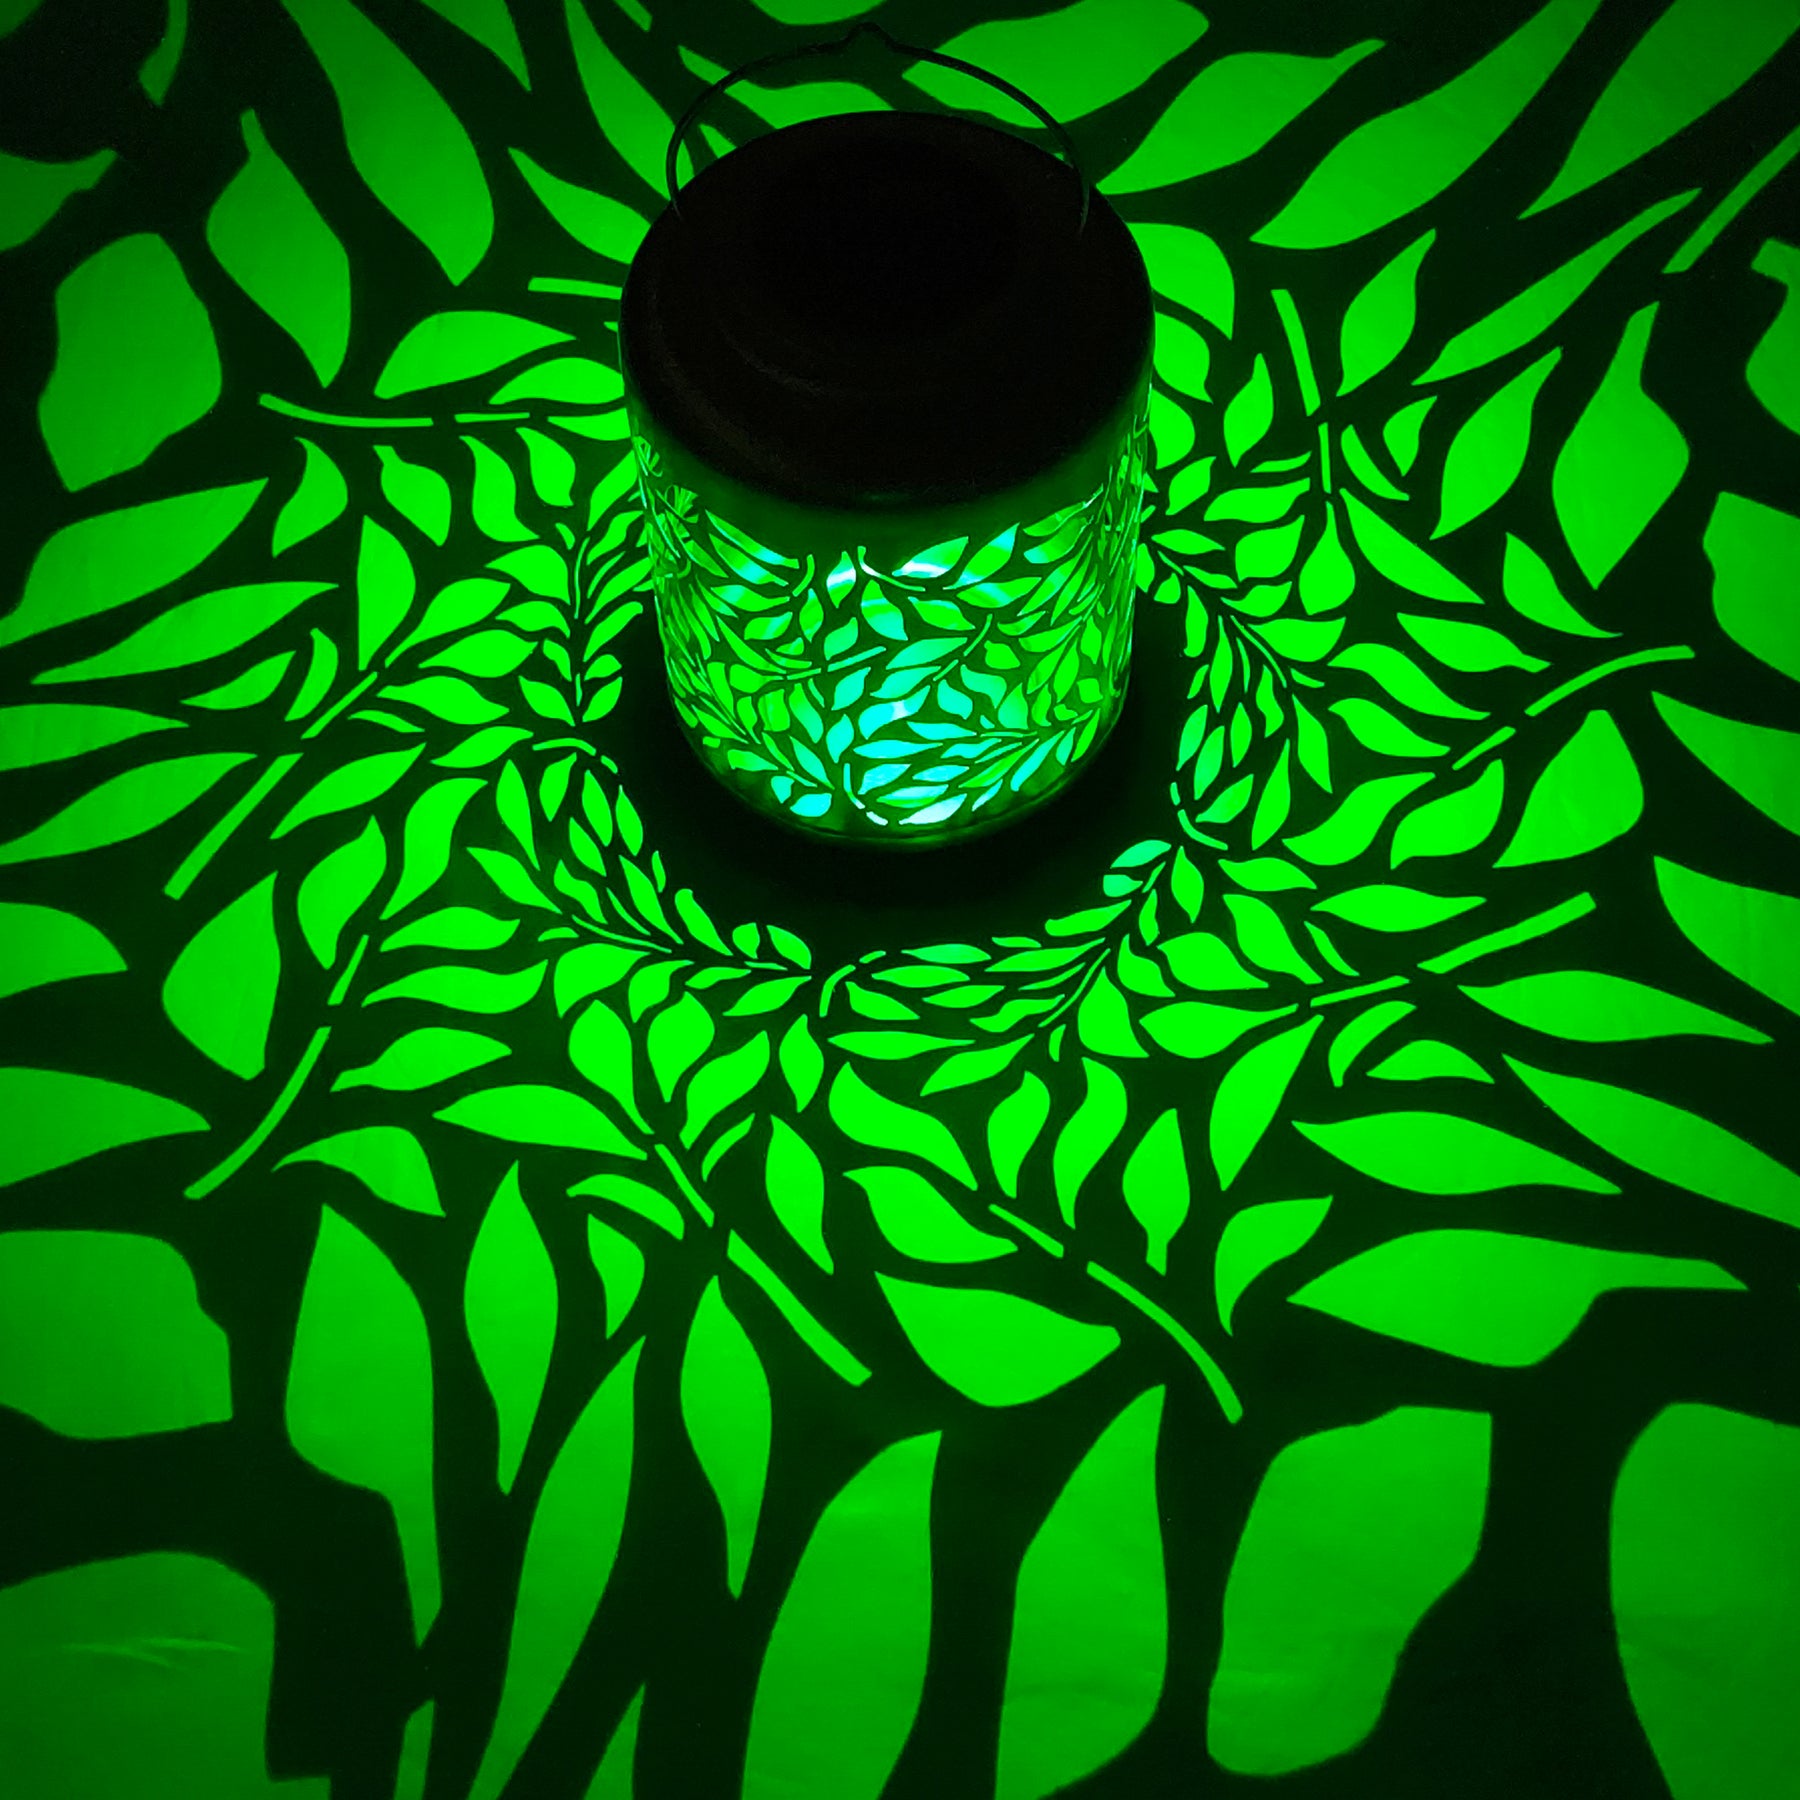 Bliss Outdoors 12-inch Tall Hanging and Tabletop Decorative Solar LED Lantern with Unique Olive Leaf Design turned on and creating a cool pattern of green  light on the surface around it.